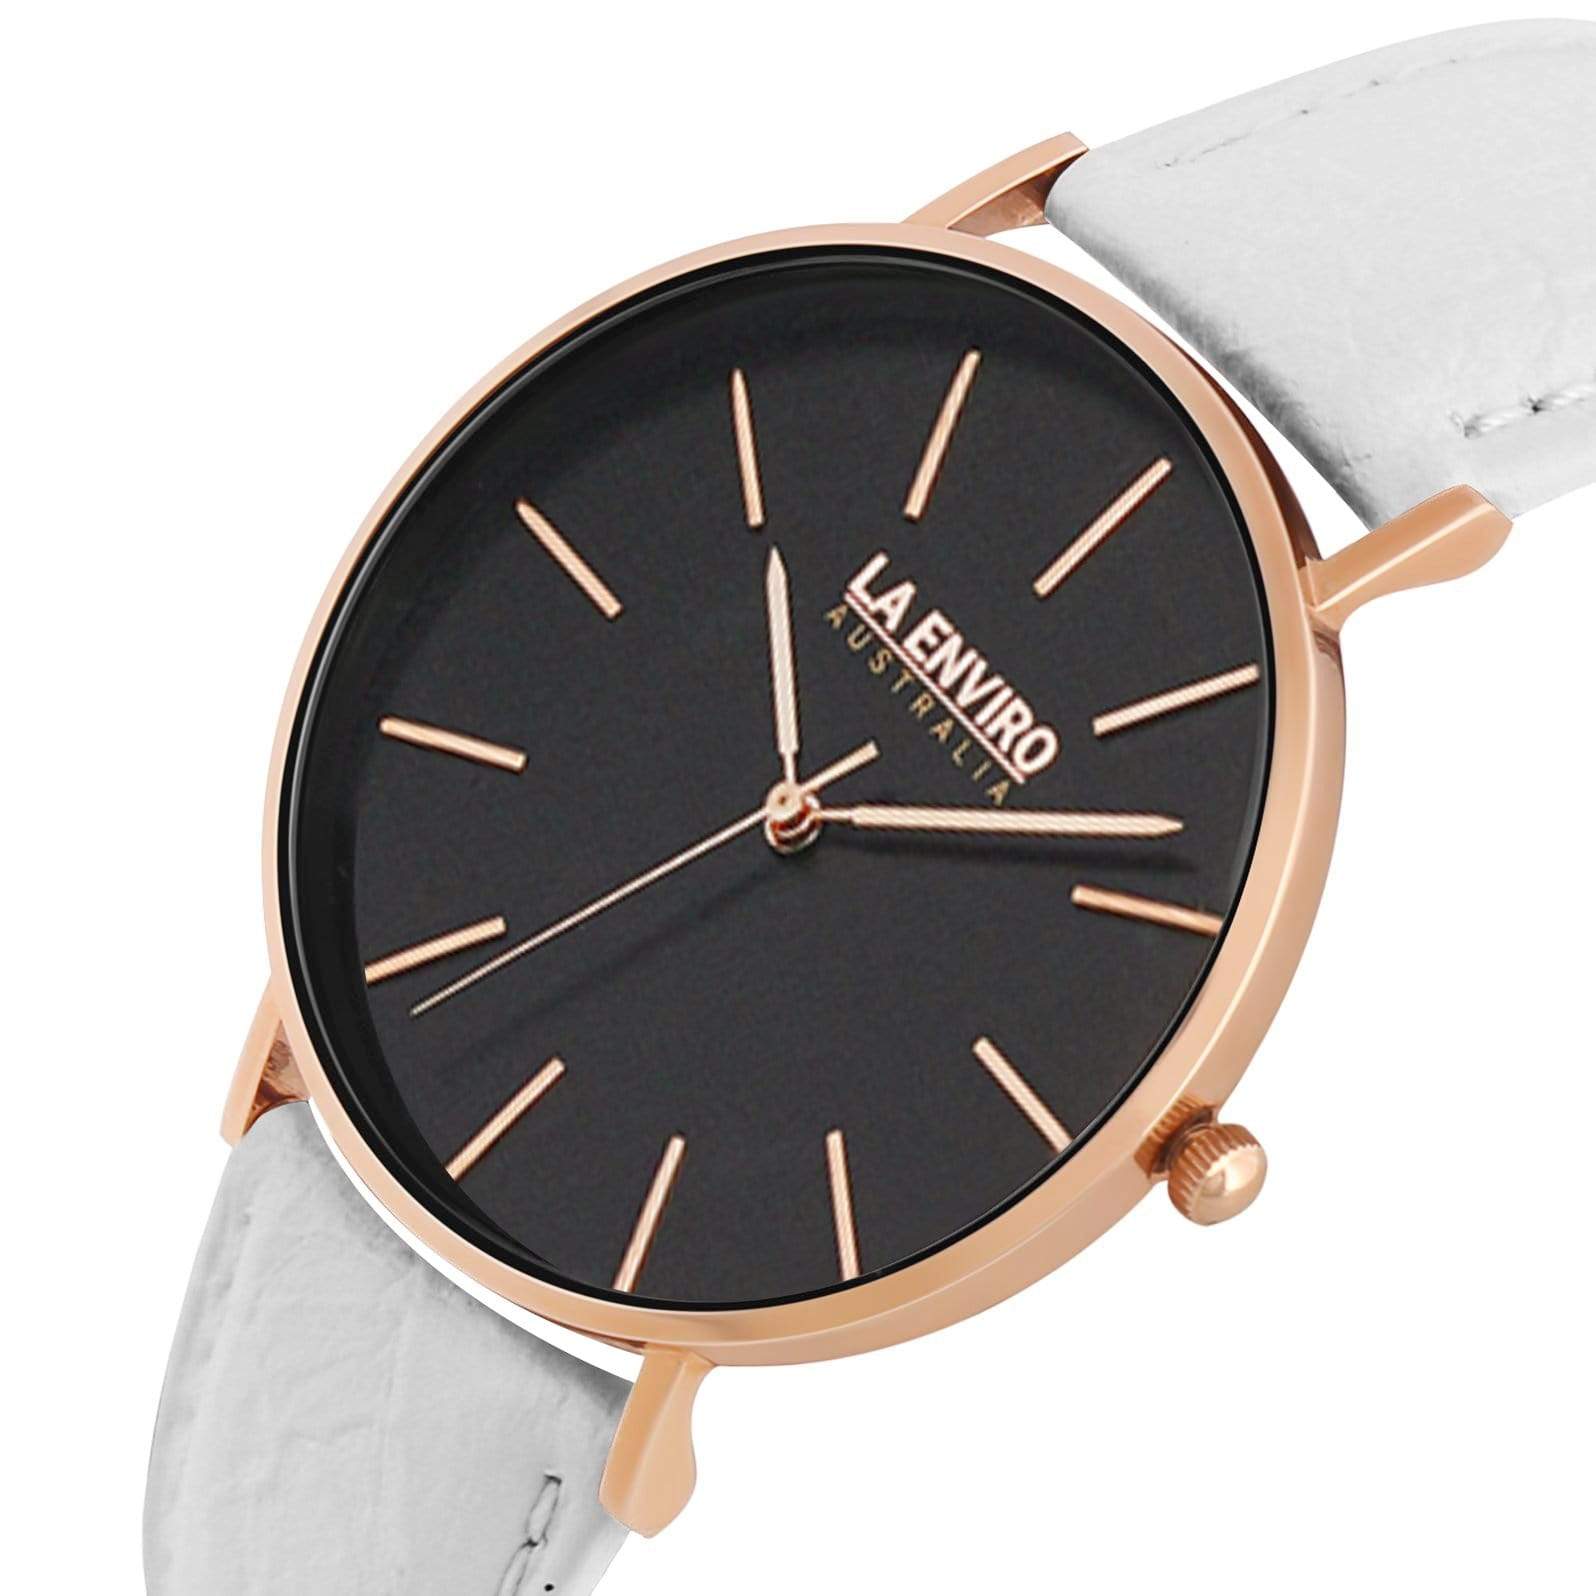 PINEAPPLE LEATHER ROSE GOLD WITH WHITE STRAP I TIERRA 40 MM-La Enviro-stride